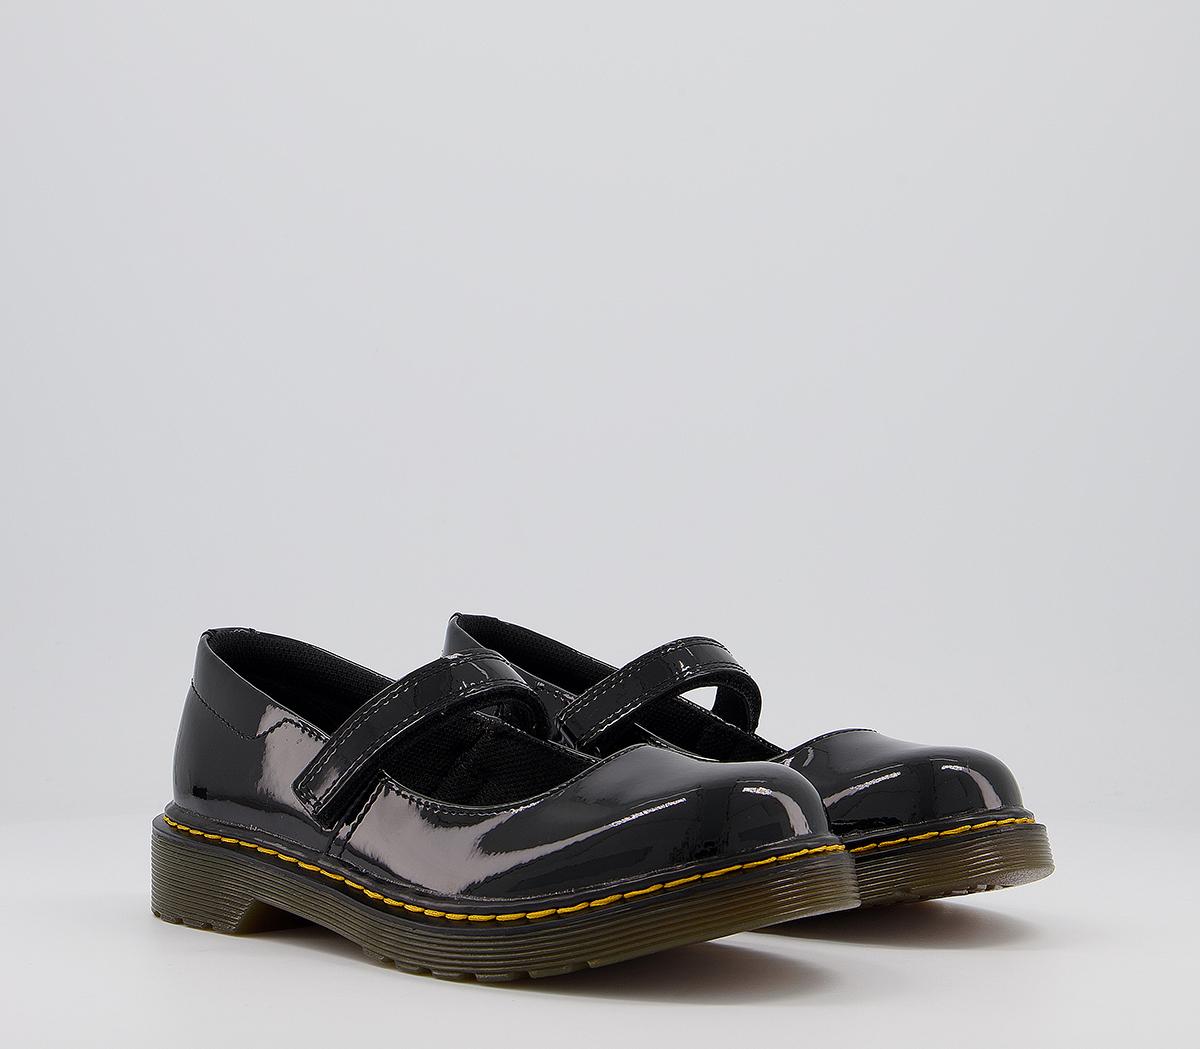 Dr. Martens Kids Maccy (jnr) Black Patent Rubber, 11 Youth